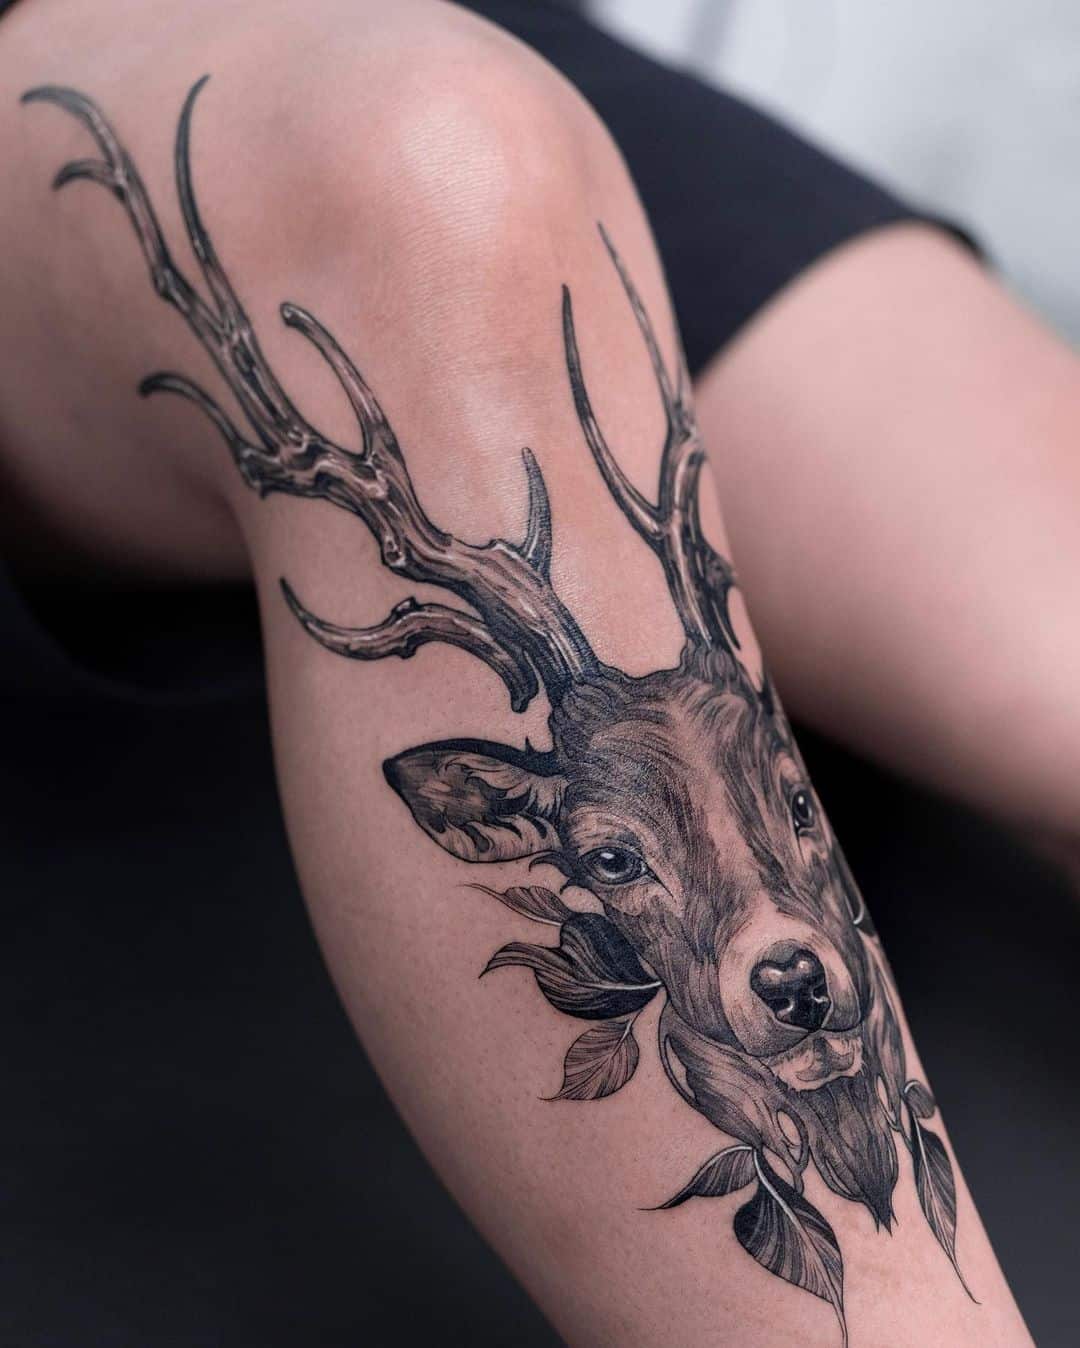 25 Captivating Deer Tattoo Ideas and Meanings  Deer tattoo Tattoos Deer  head tattoo